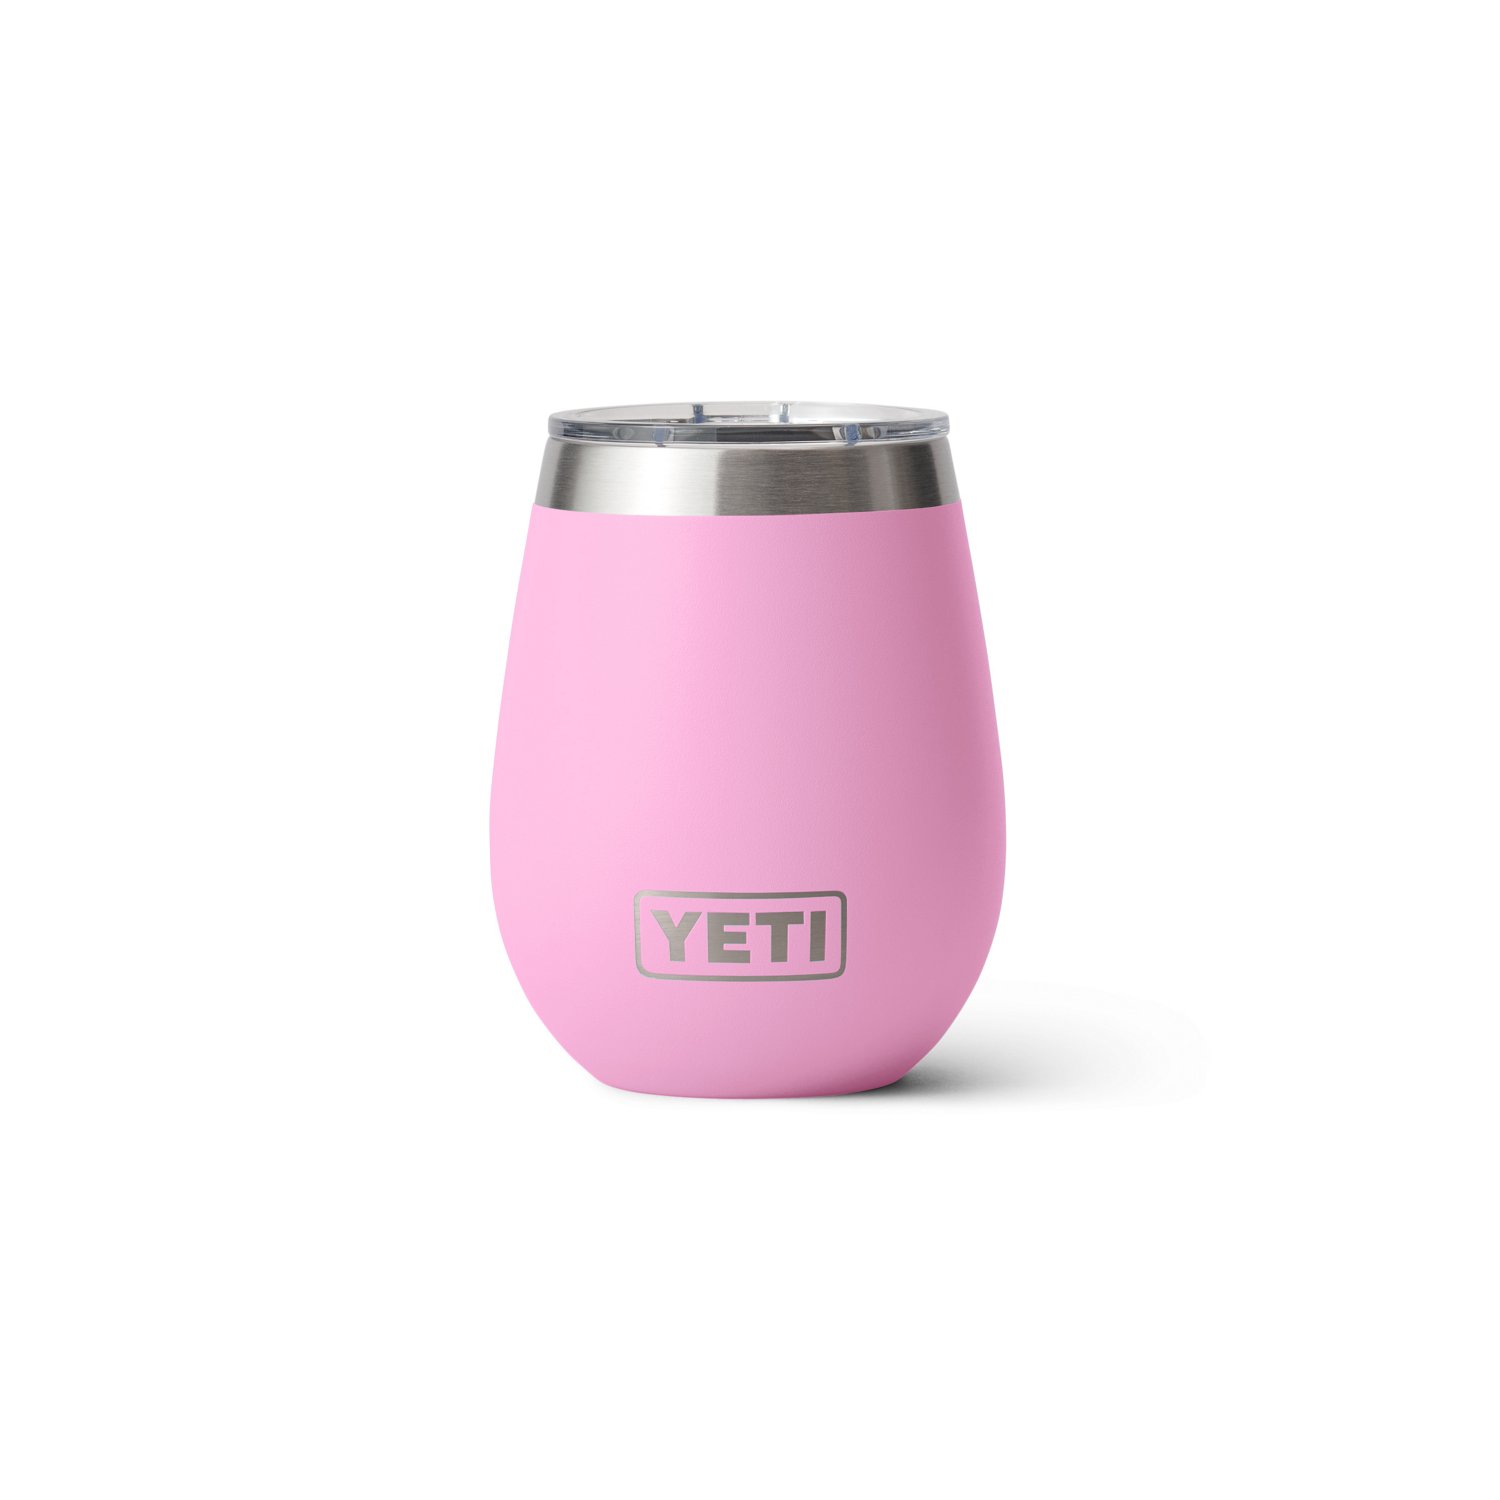 https://academy.scene7.com/is/image/academy//drinkware/yeti-rambler-10-oz-wine-tumbler-with-magslider-lid-21071501927-pink/5af07e8335ab47e3a3e41b080b73acea?$pdp-gallery-ng$